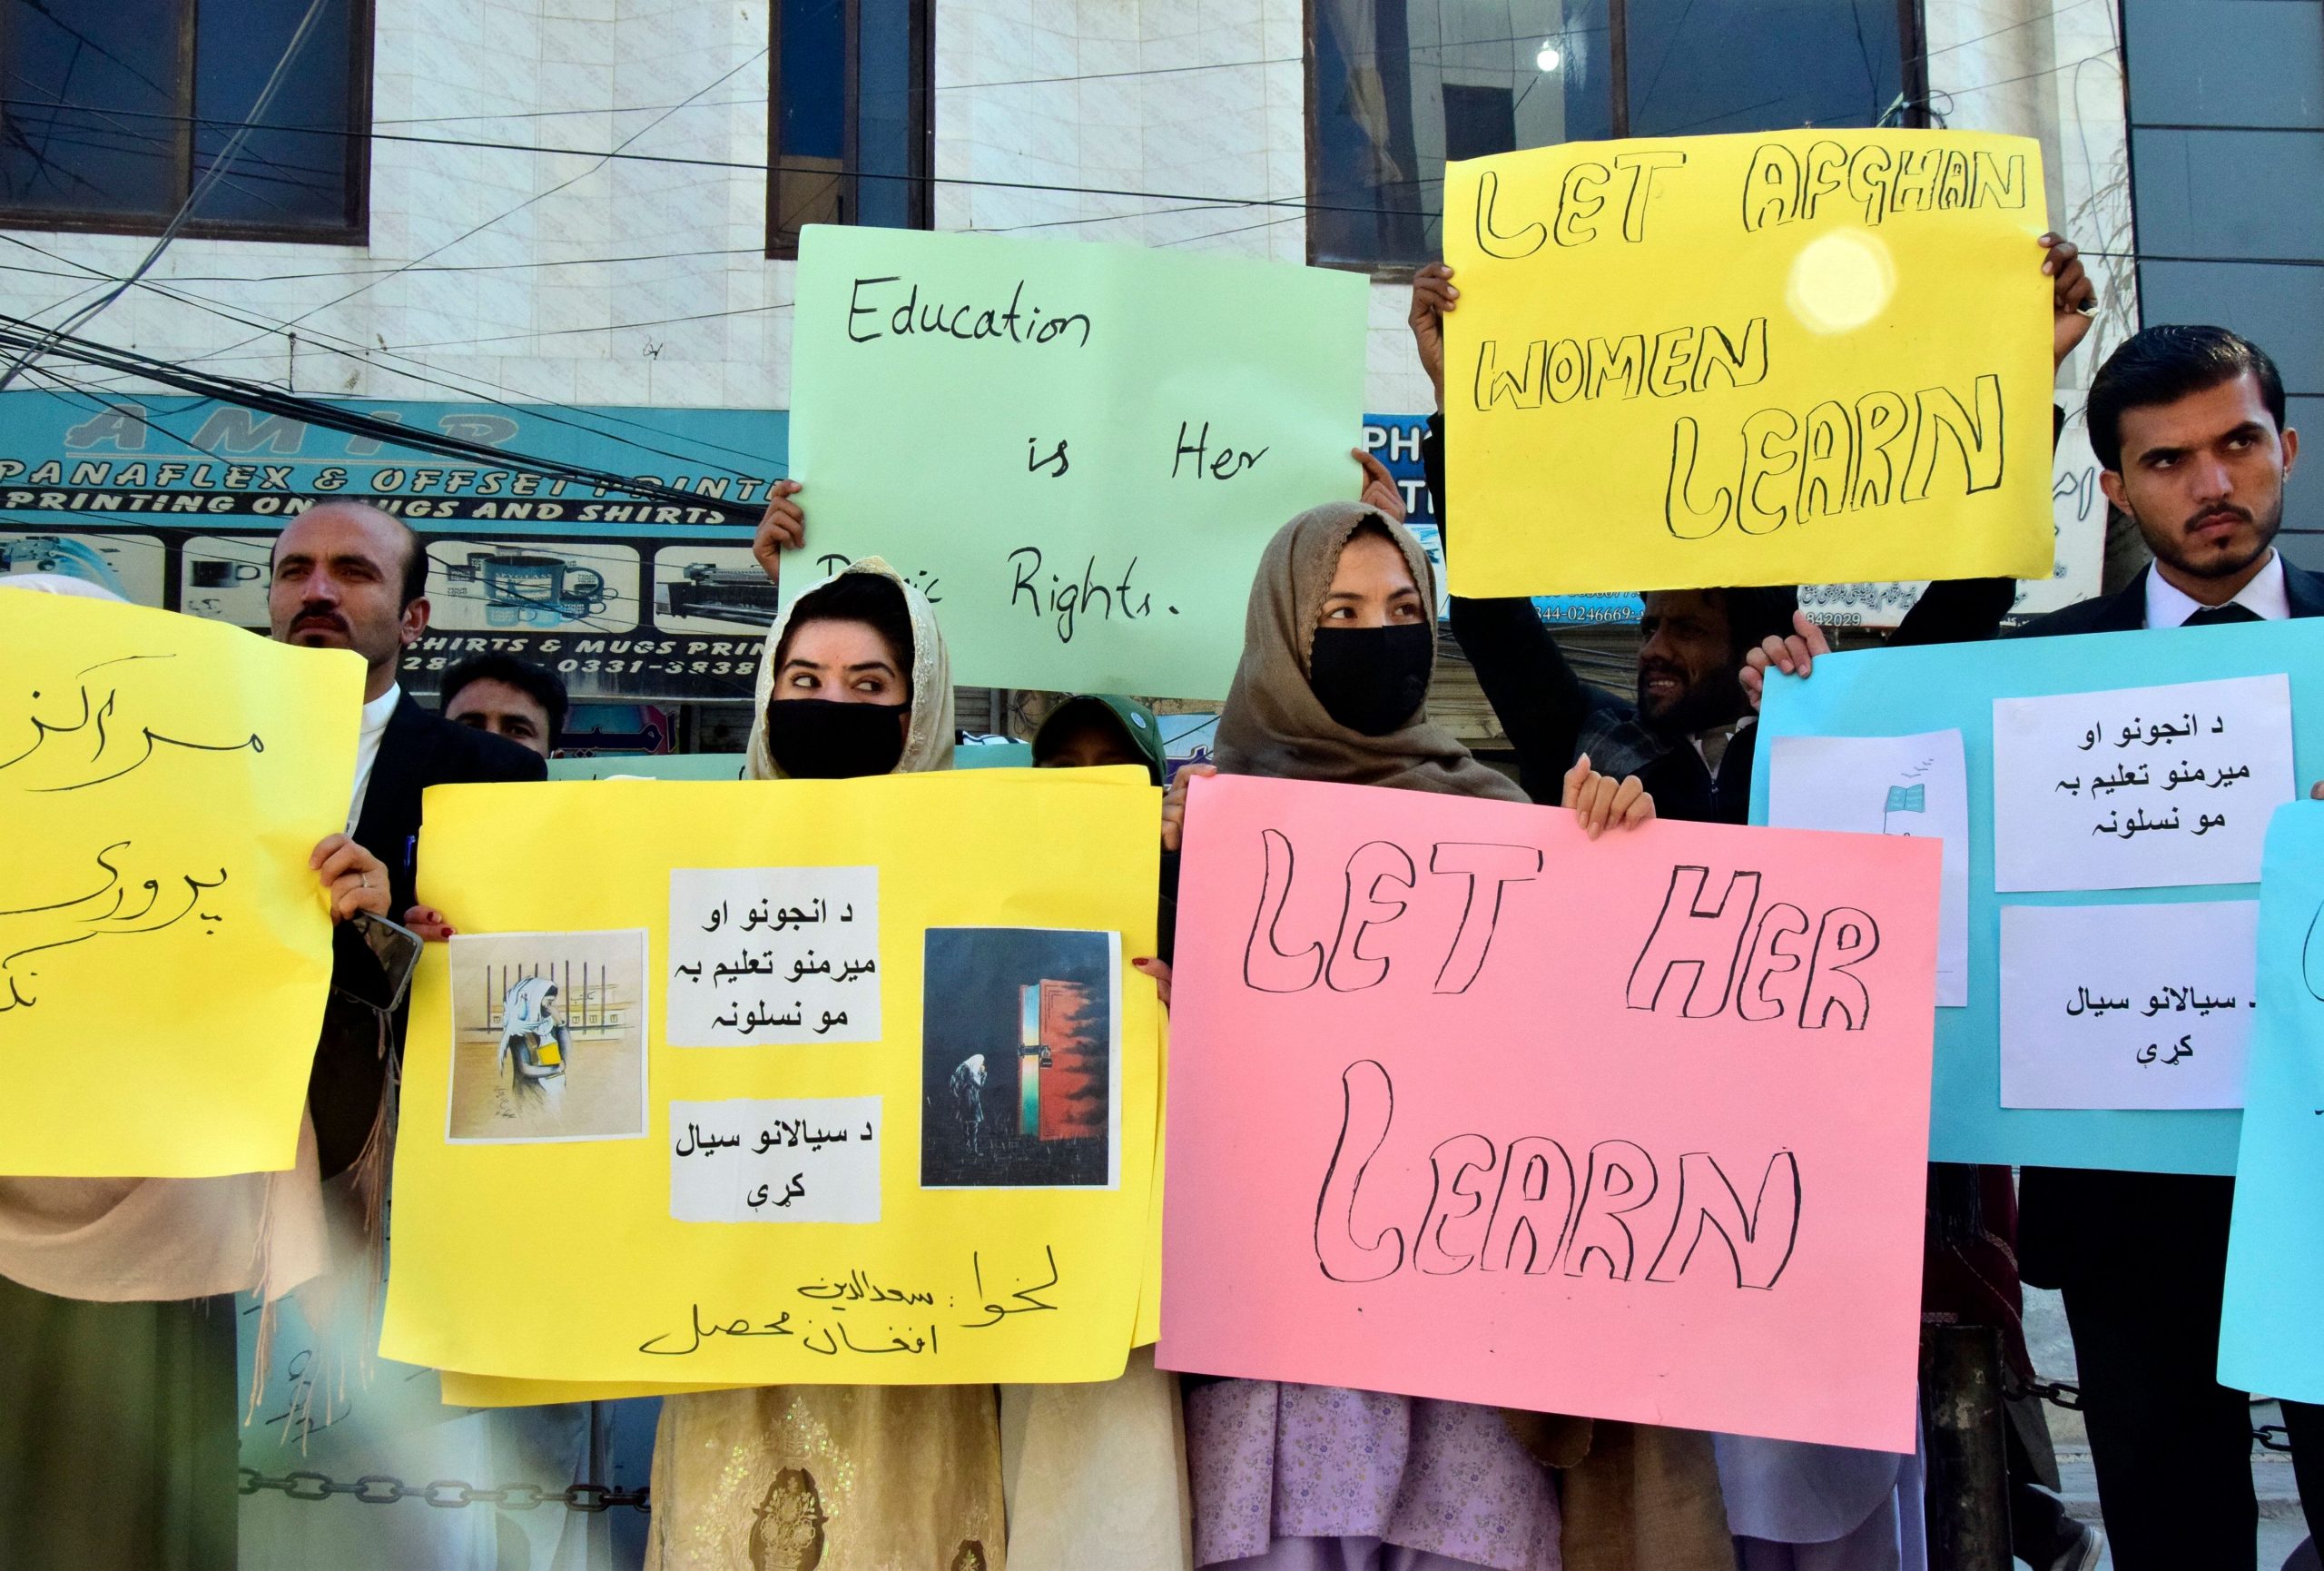 Afghanistan professor tears diplomas in protest against women education ban: Watch